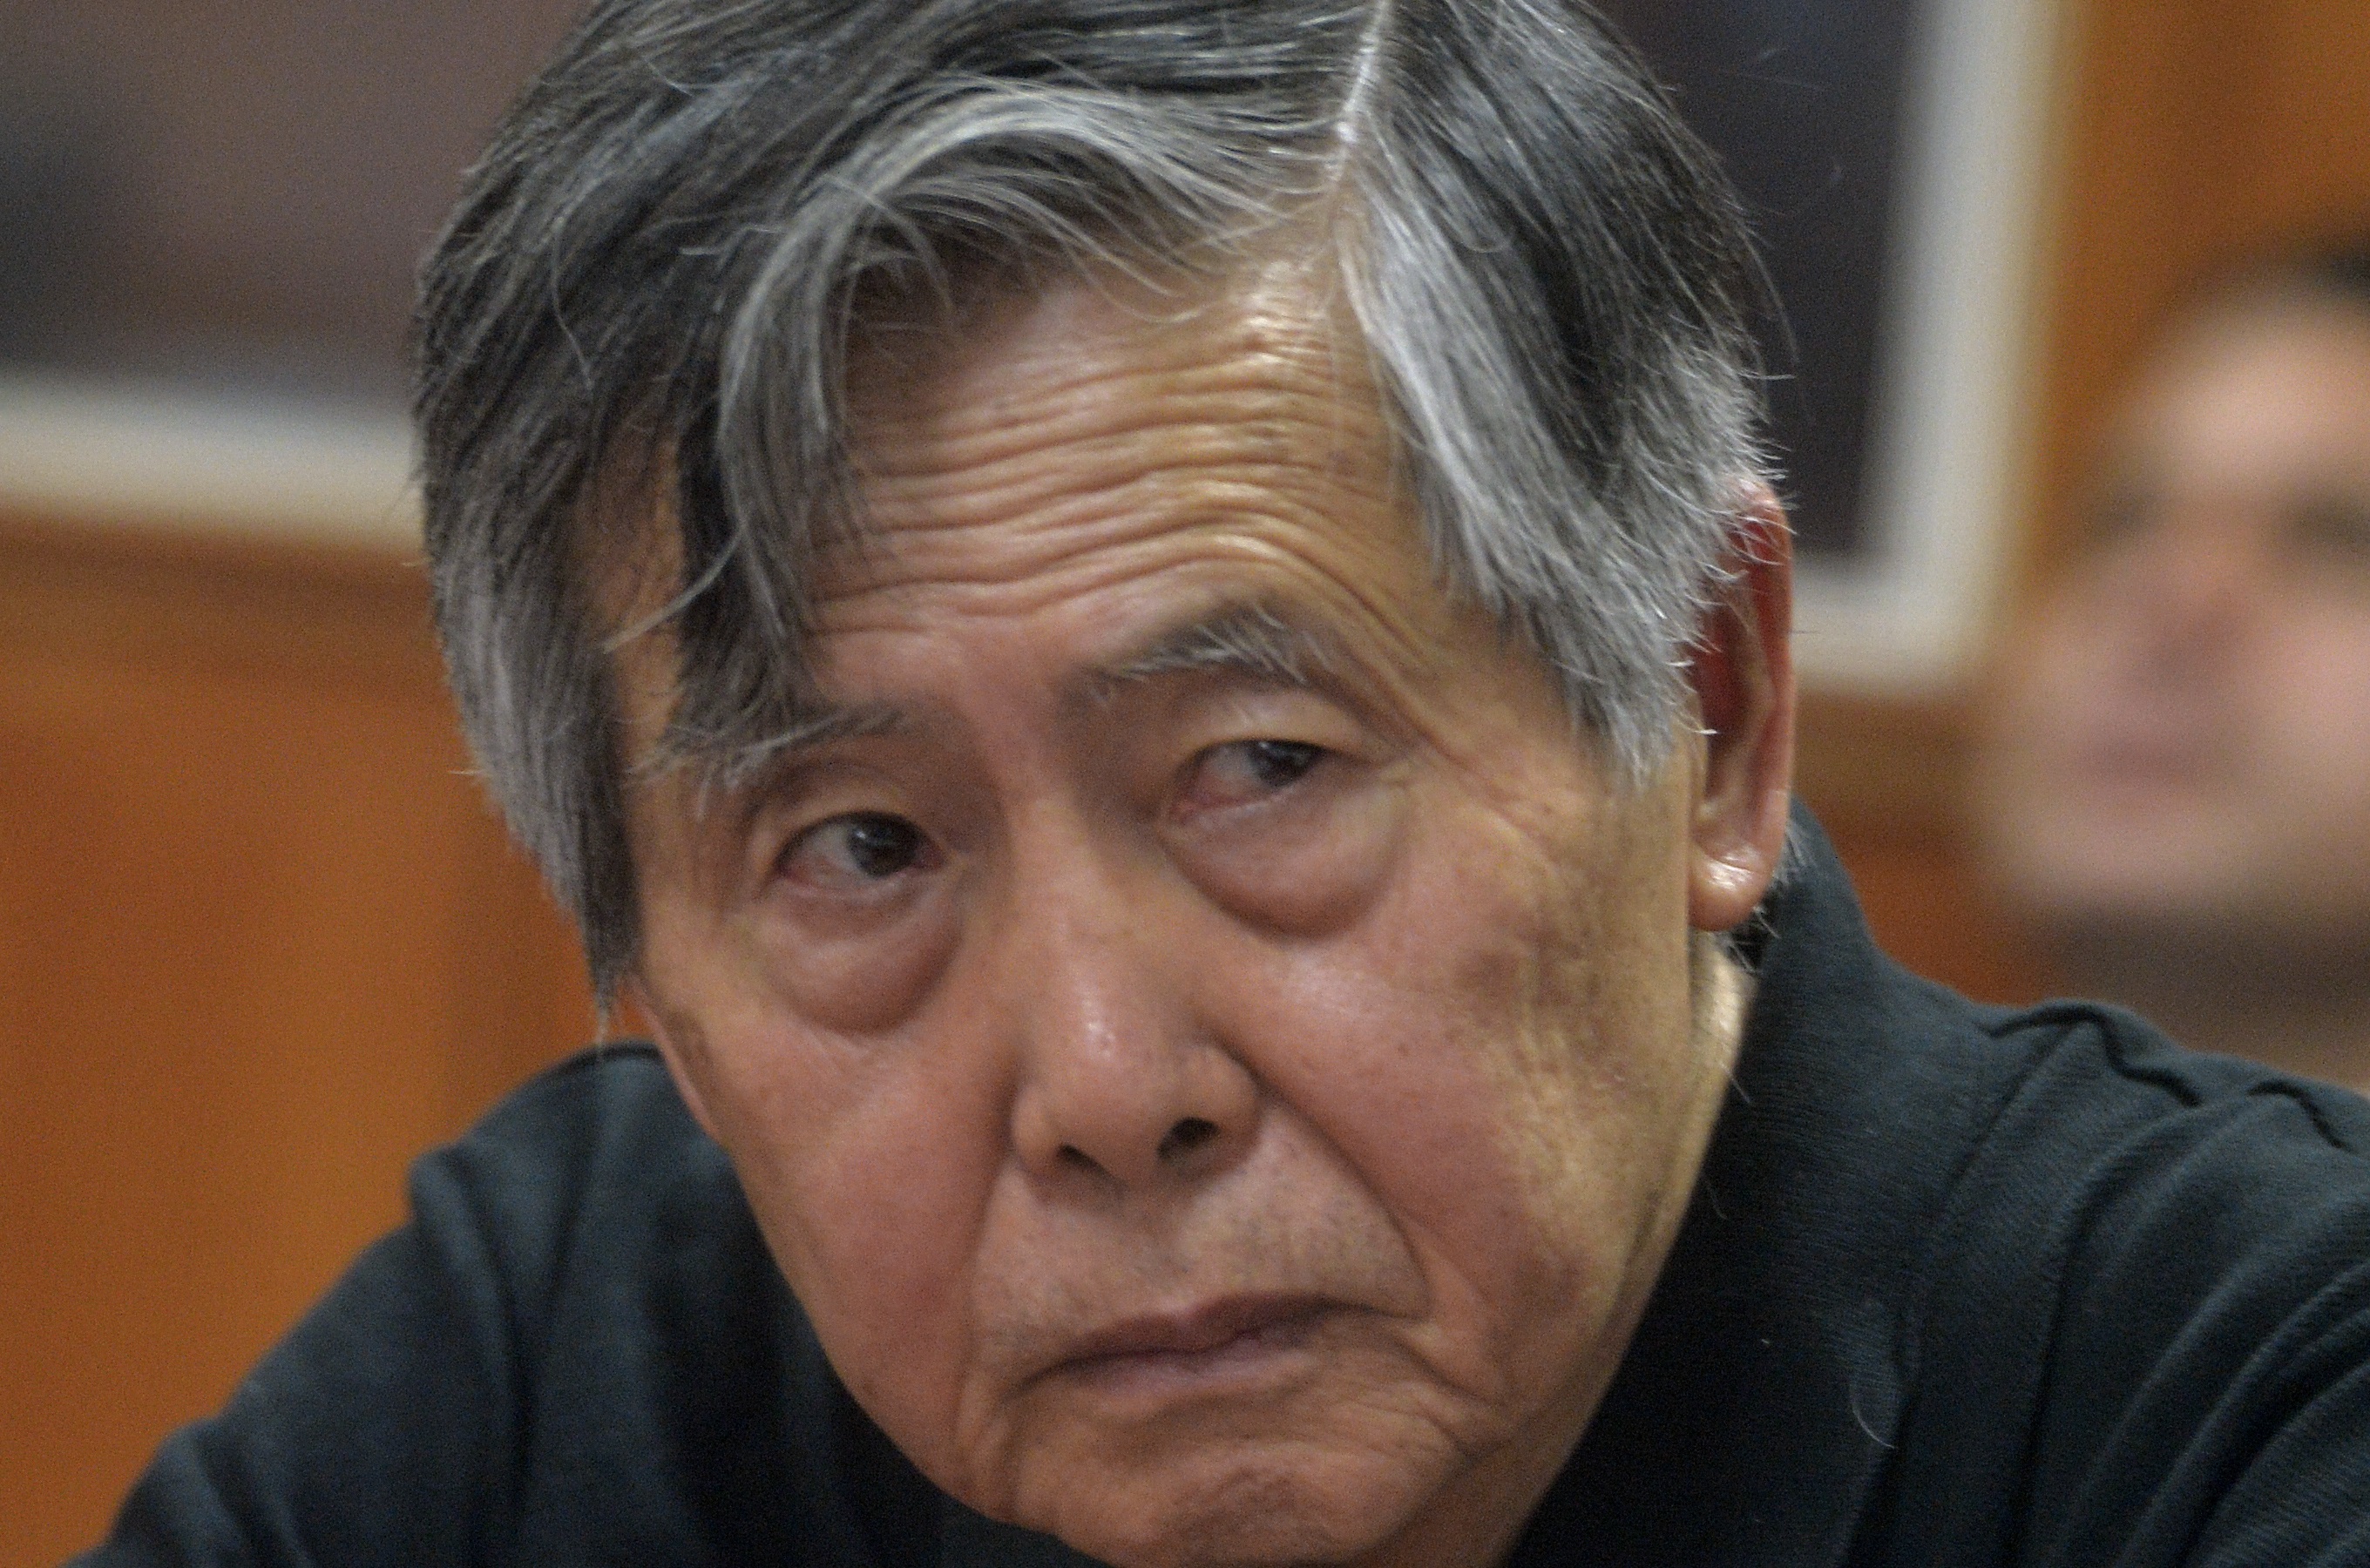 Fujimori, confined in the prison of the Directorate of Special Operations (Diroes), was extradited from Chile in September 2007